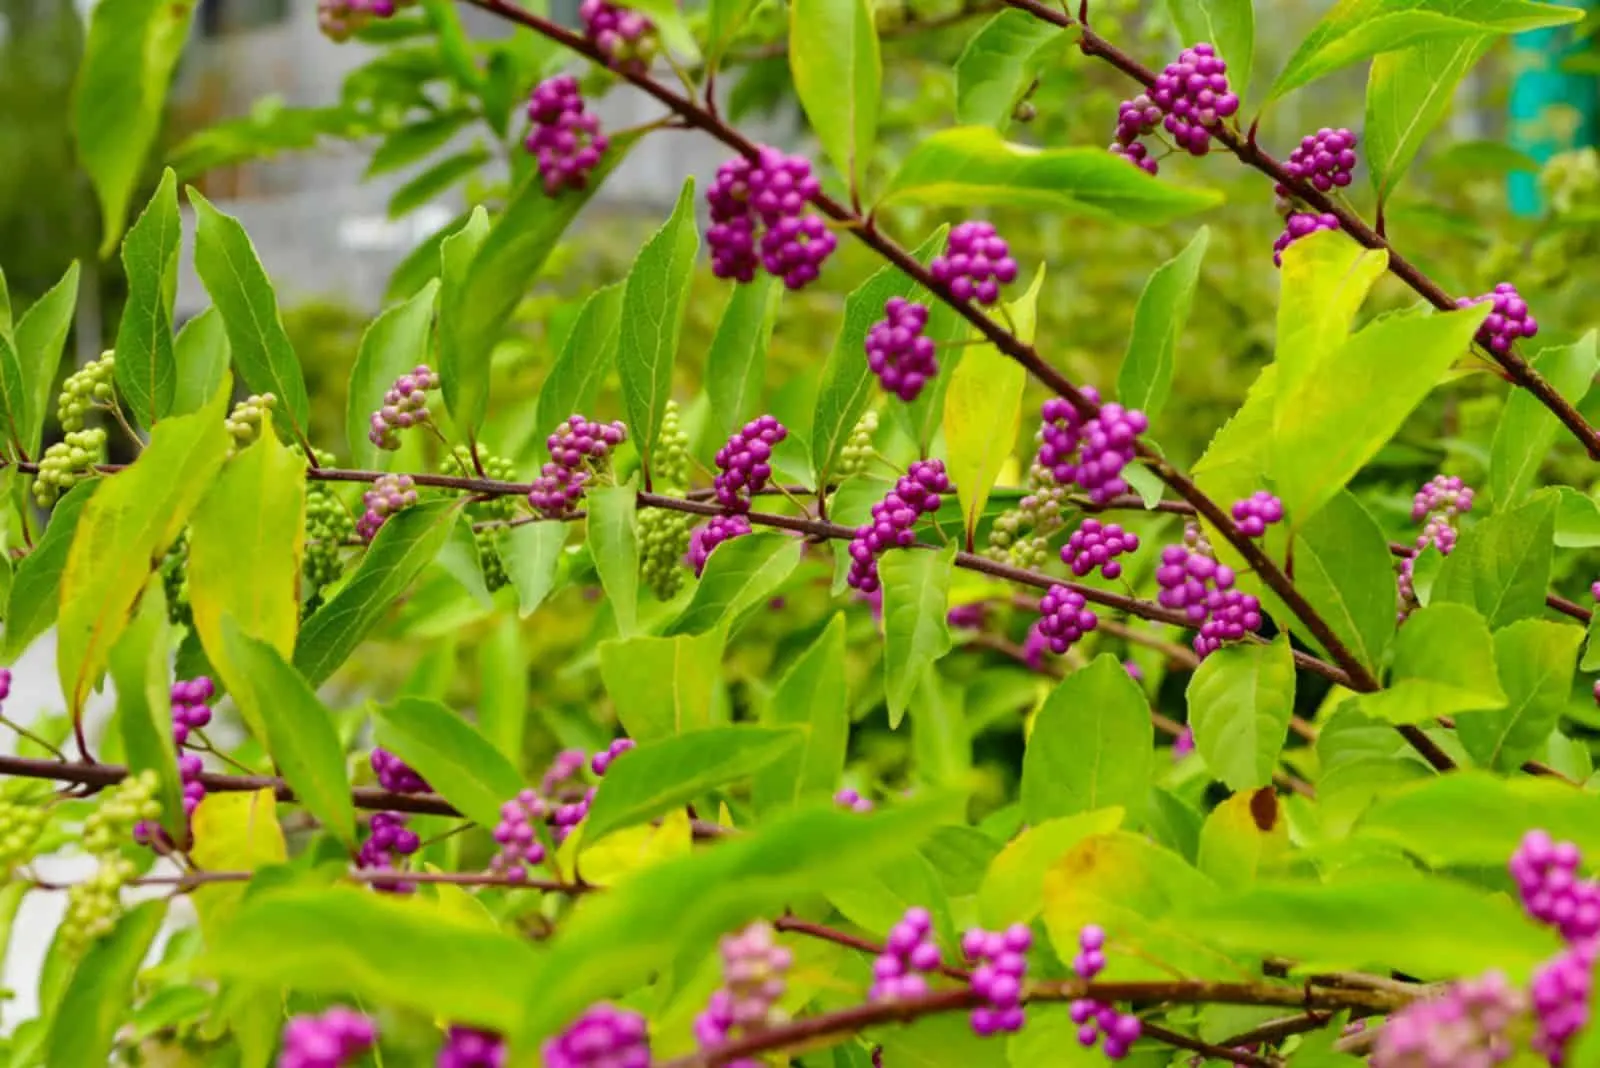 Beautyberry tree or American beautyberry